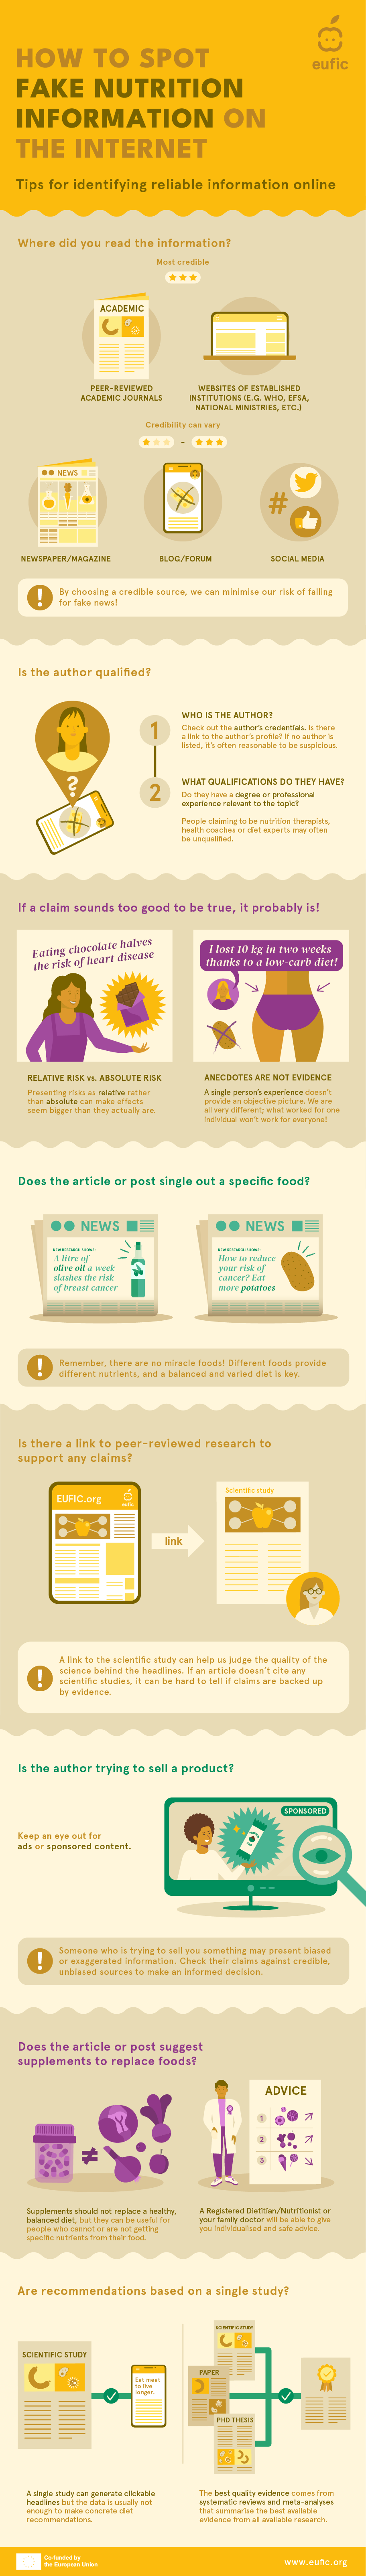 Infographic explaining how to spot fake nutrition information on the internet